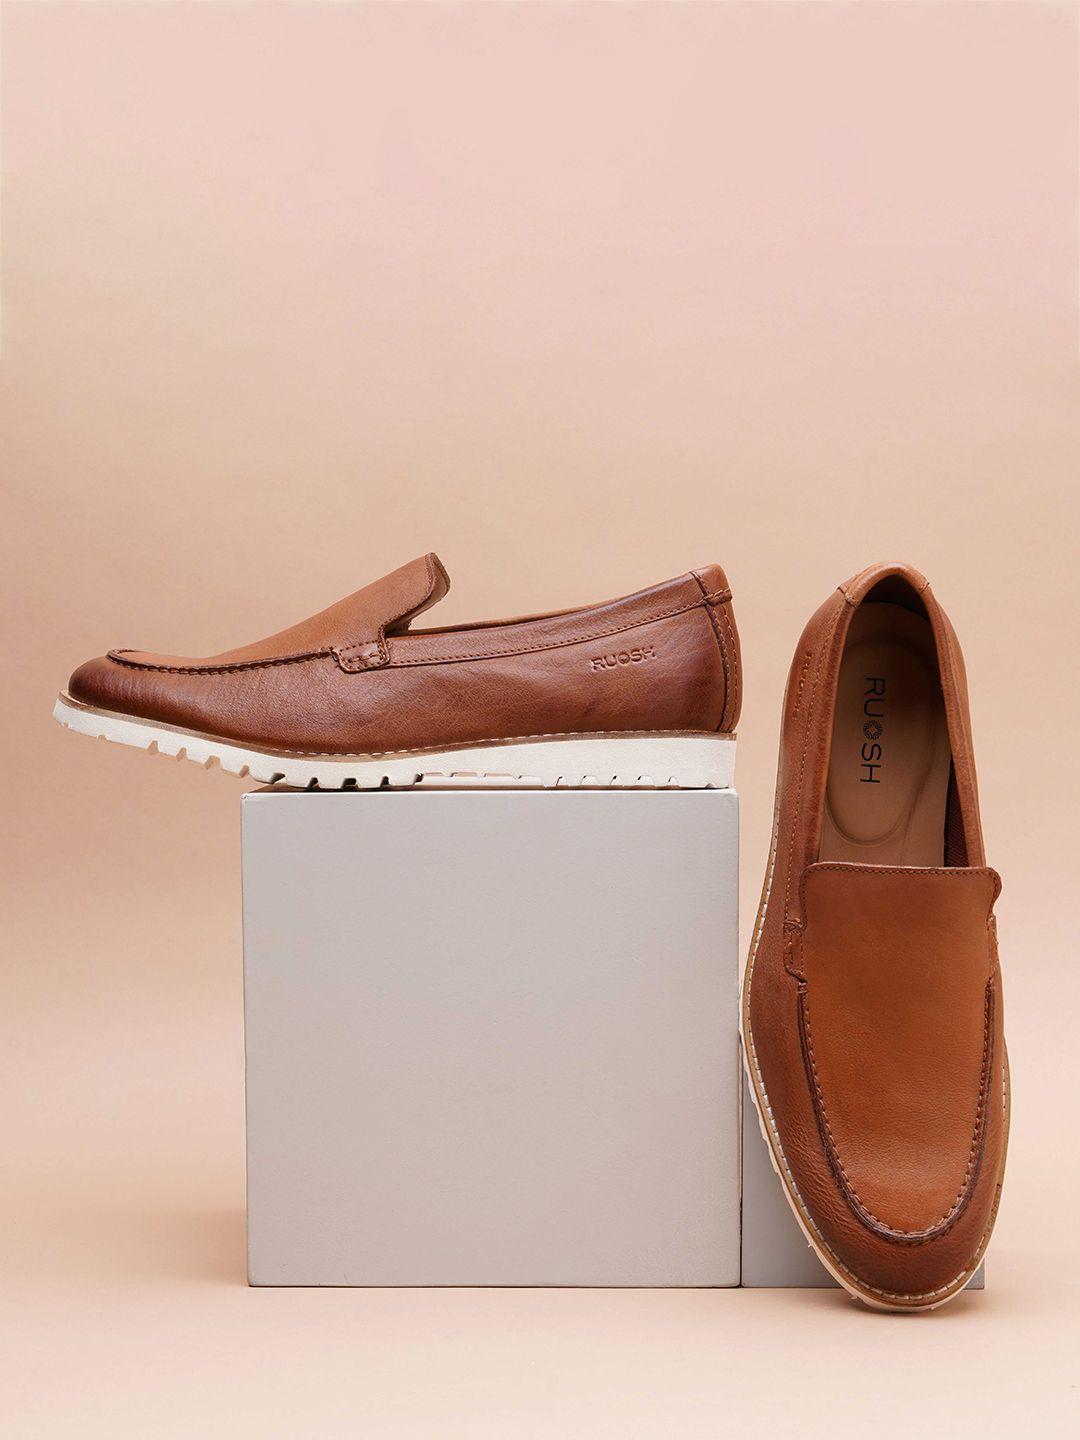 ruosh-men-textured-leather-loafers